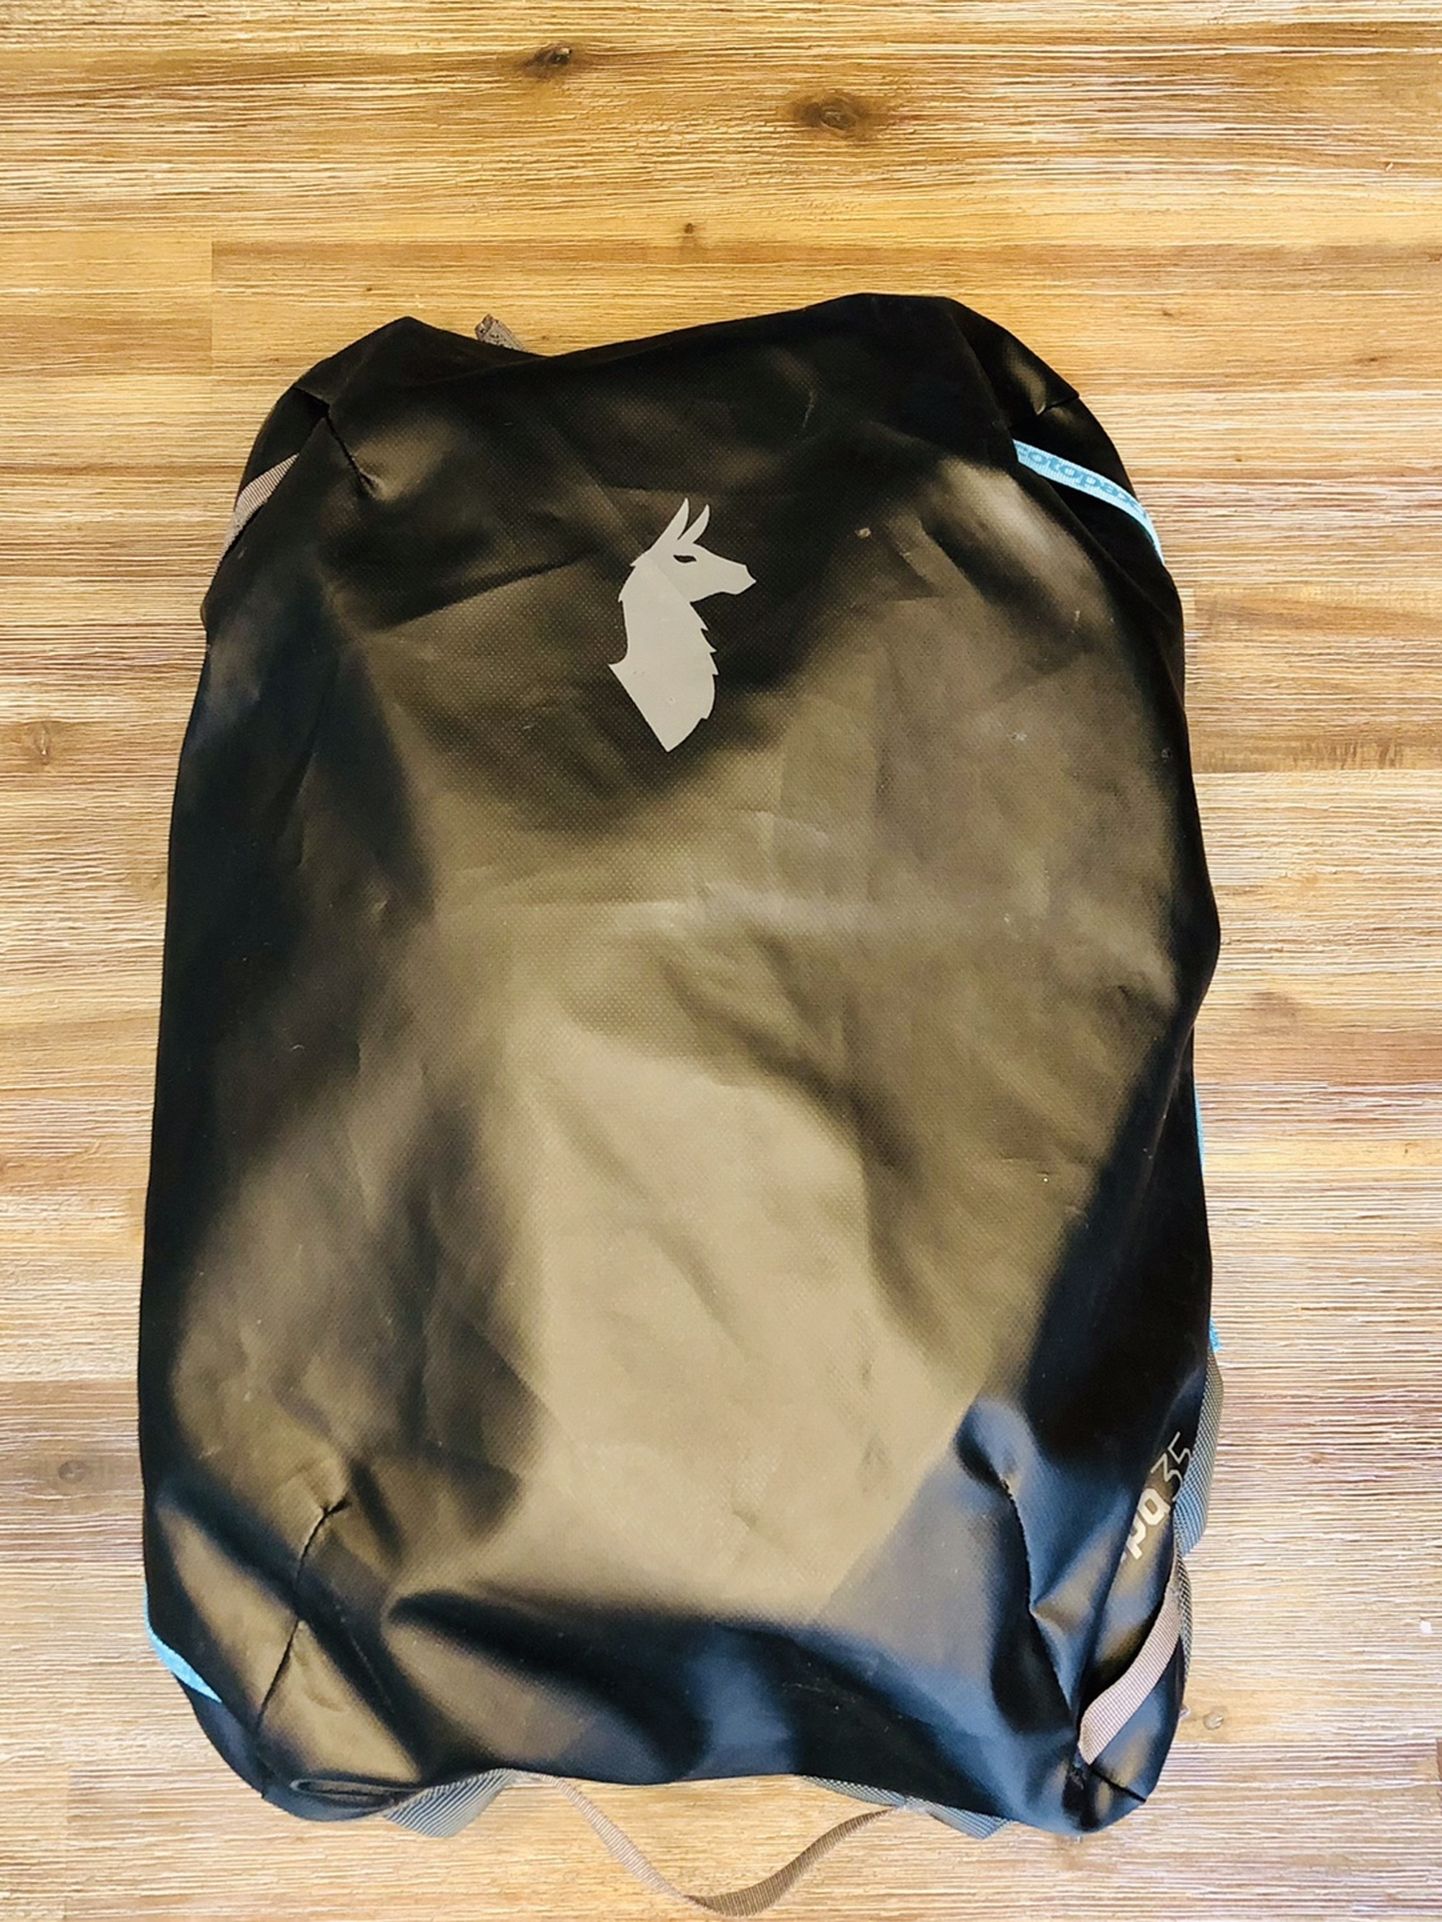 Cotopaxi 35L Allpa Travel Pack and Cotopaxi Waterbottle Holder, Rain Cover, Shoe Bag, And Mesh Laundry Bag